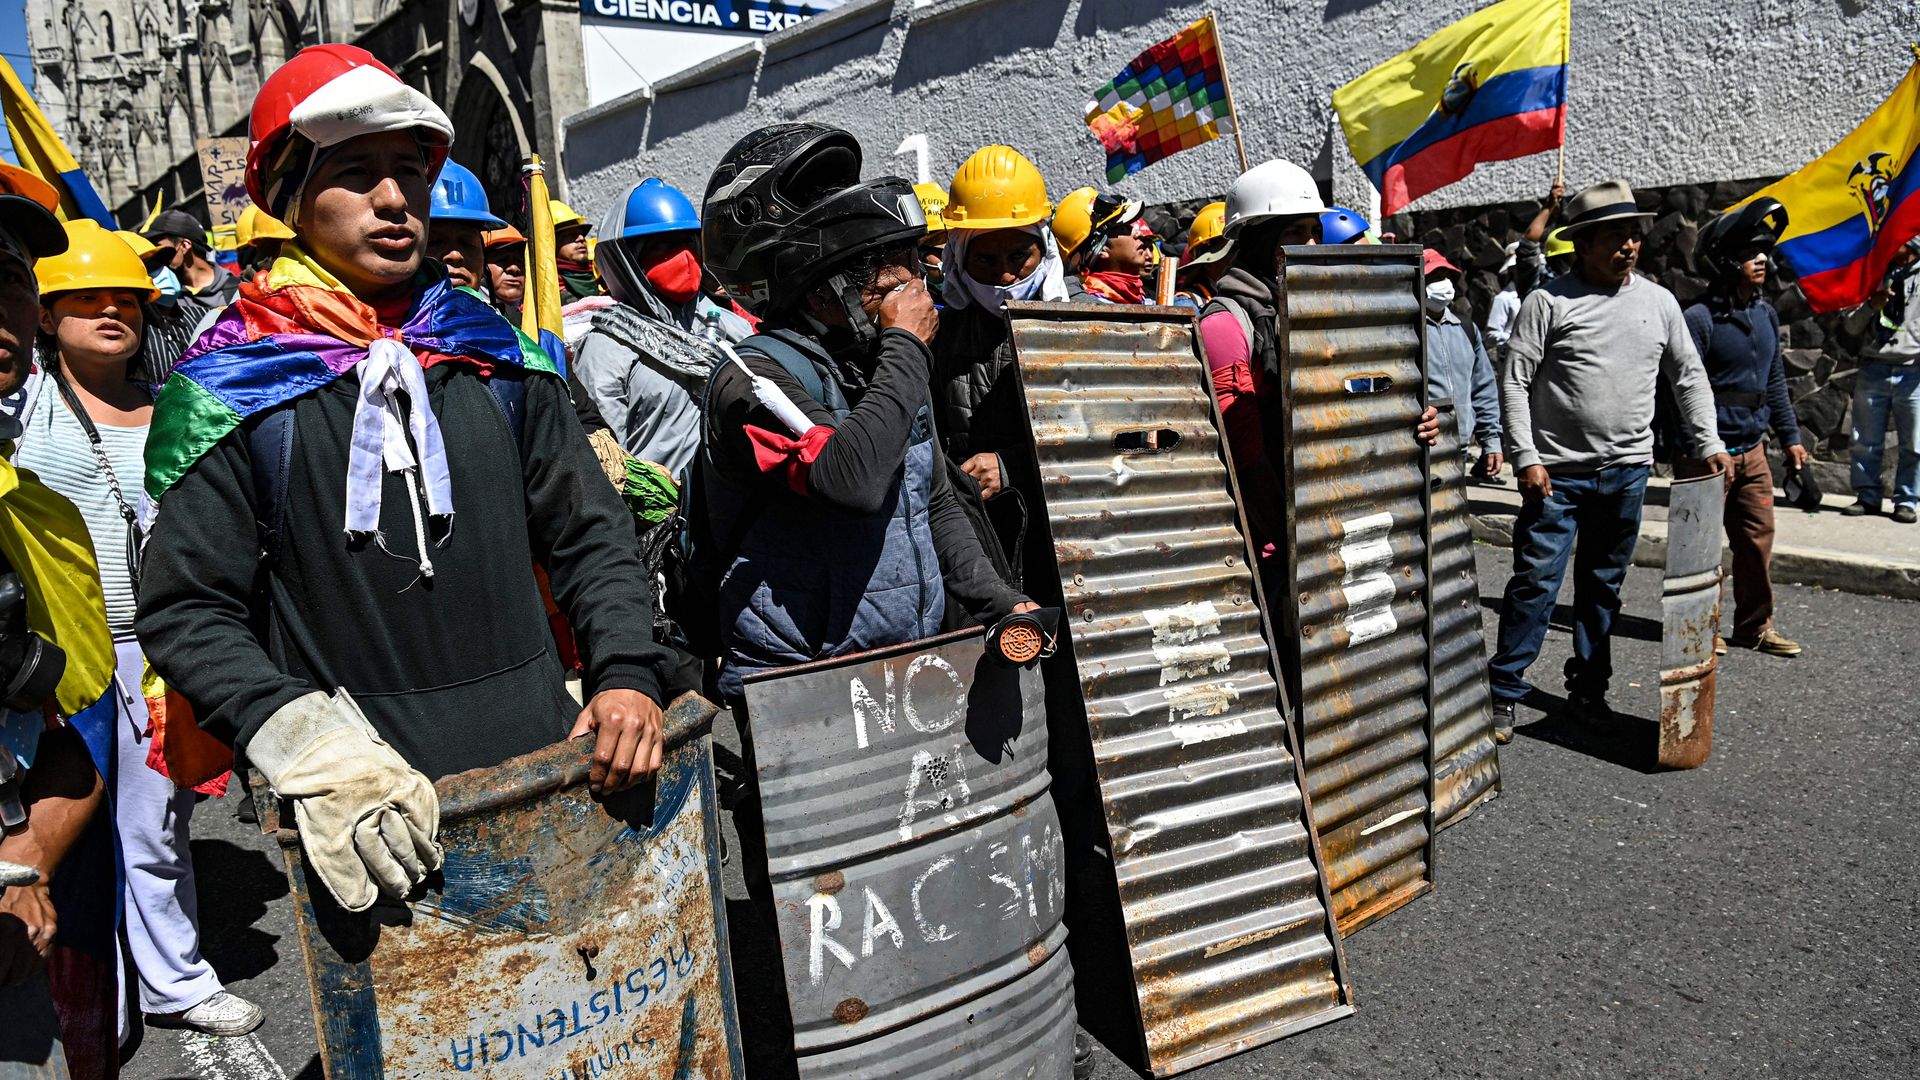 A group of protesters wearing helmets, capes and holding sheets of metal as protection walk through an anti-government protest in Ecuador